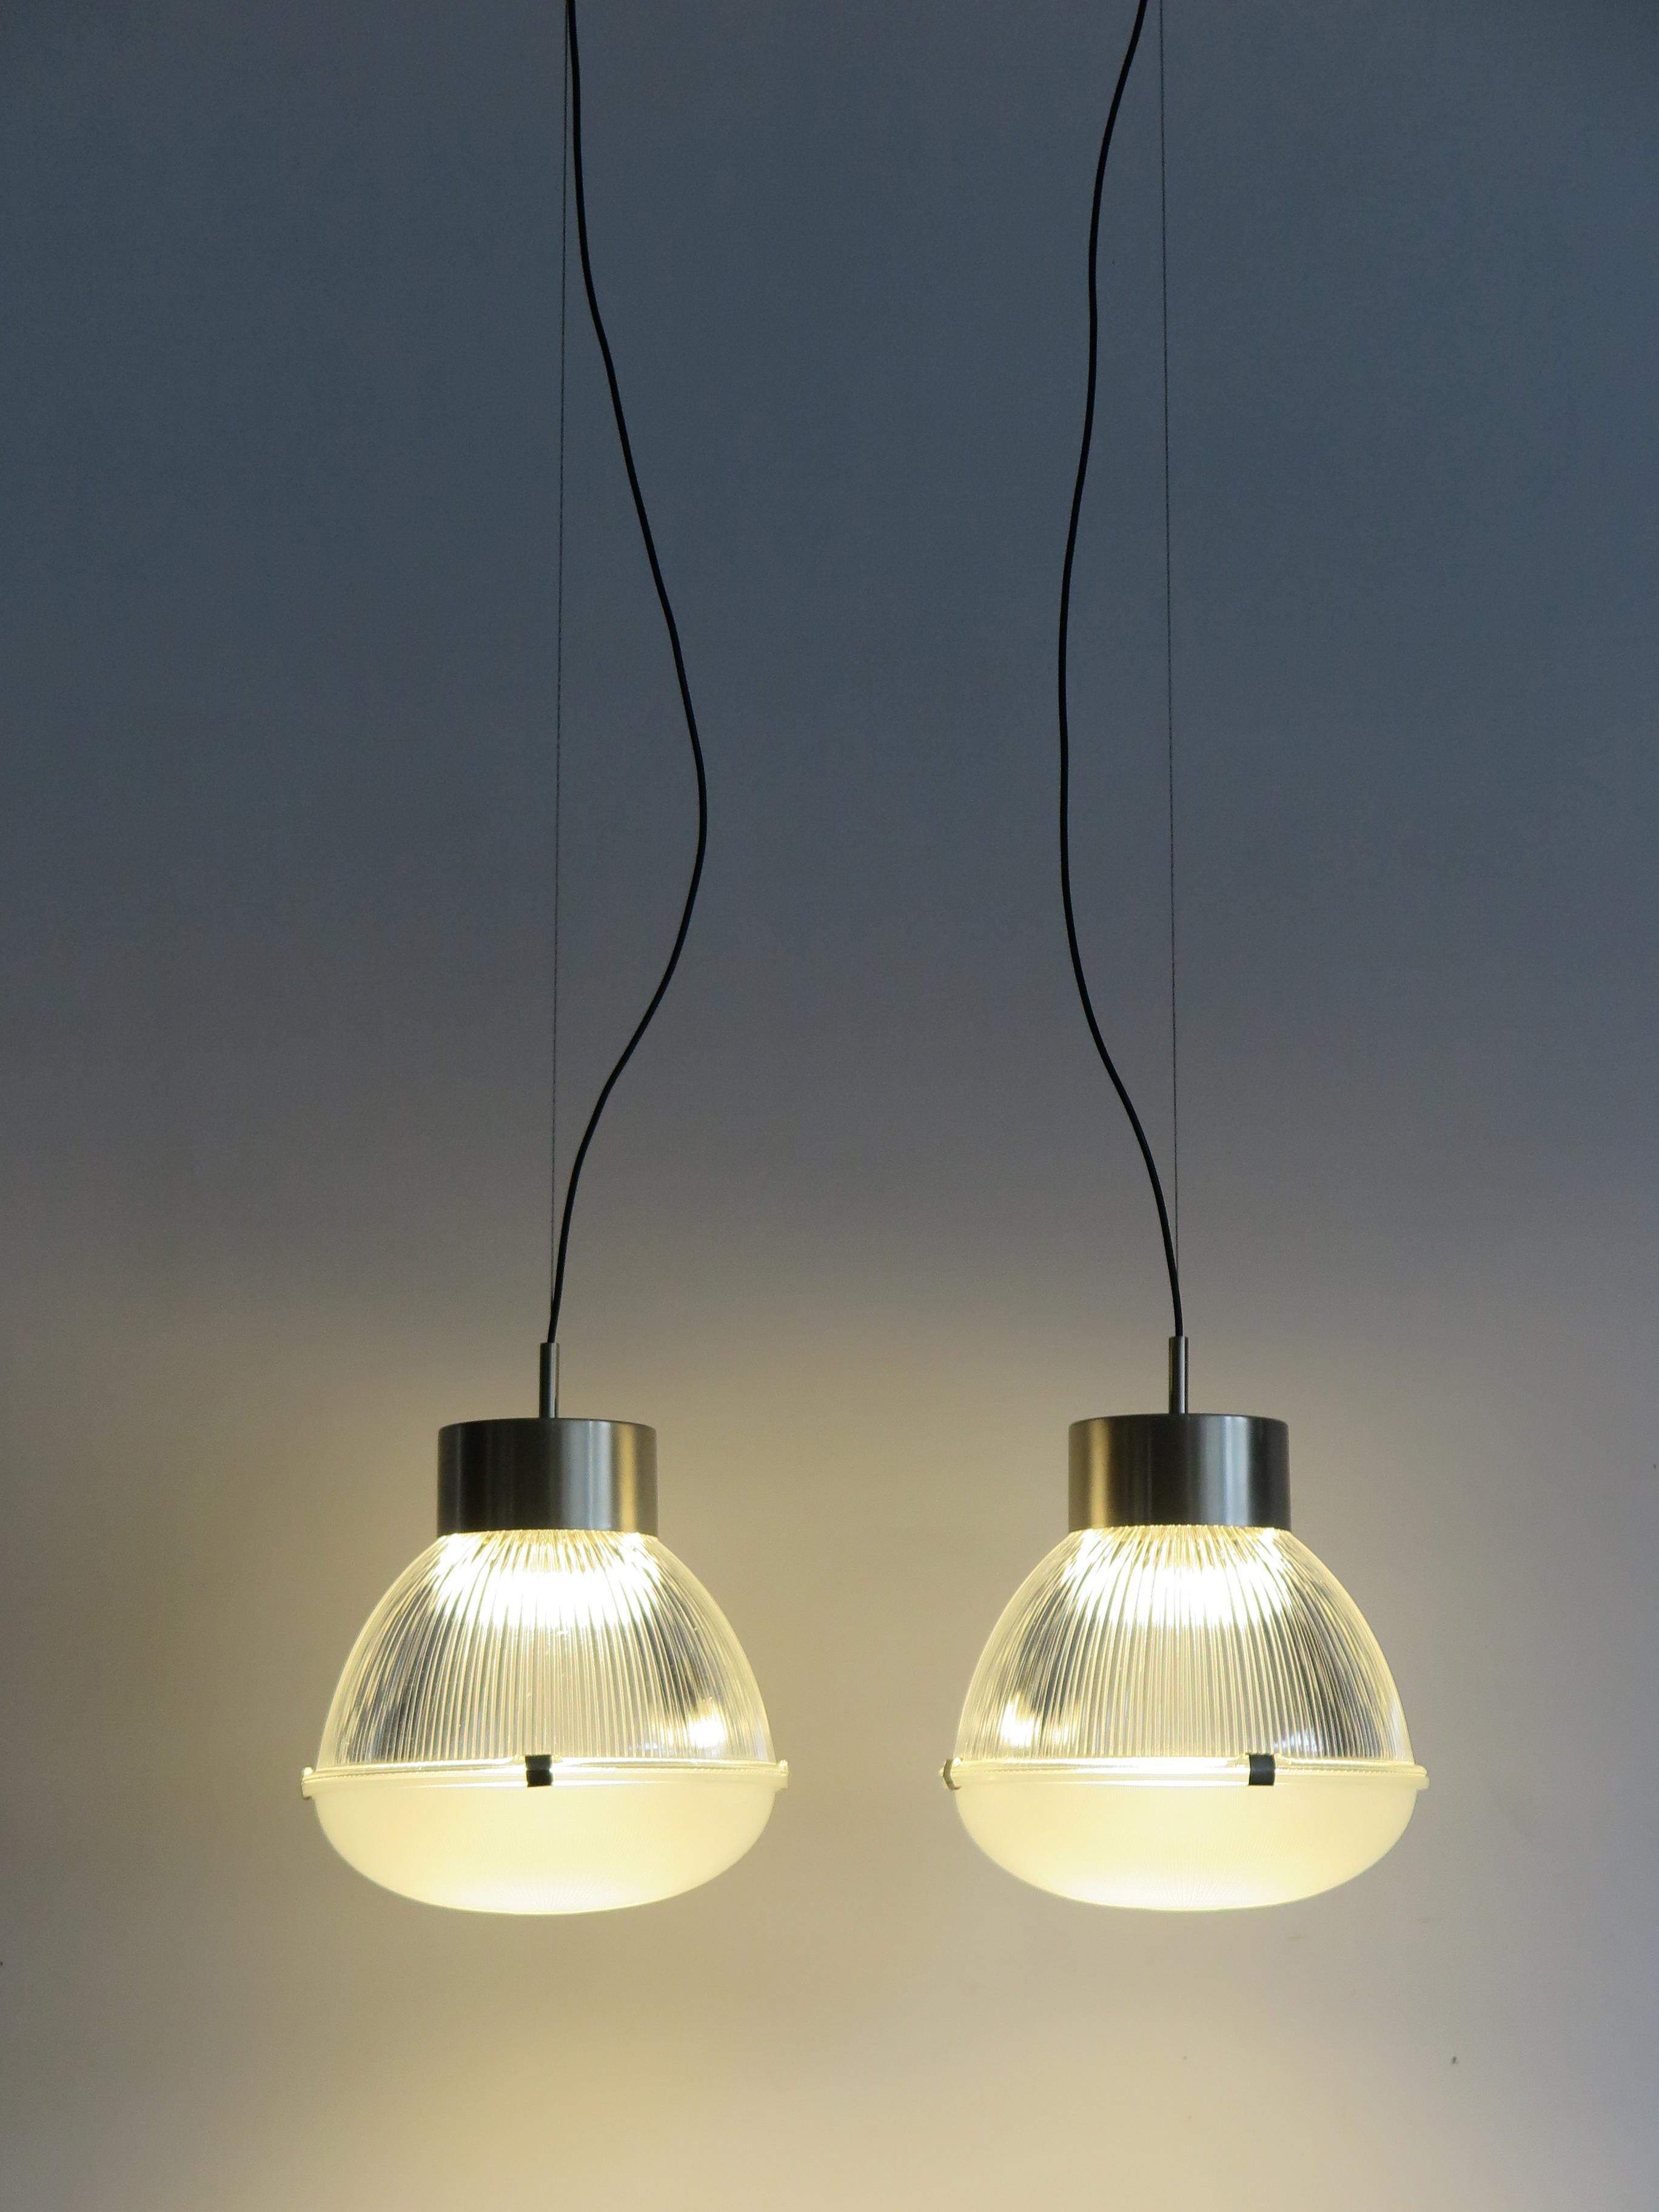 Mid-Century Modern design italian couple of pendant lamps designed by Tito Agnoli and produced by Oluce with chrome-plated steel frame and thick moulded glass diffusers, Italy, 1969.

Bibliography:
Domus 409, 12/1963, p. 12
T. Braeuniger, O-Luce